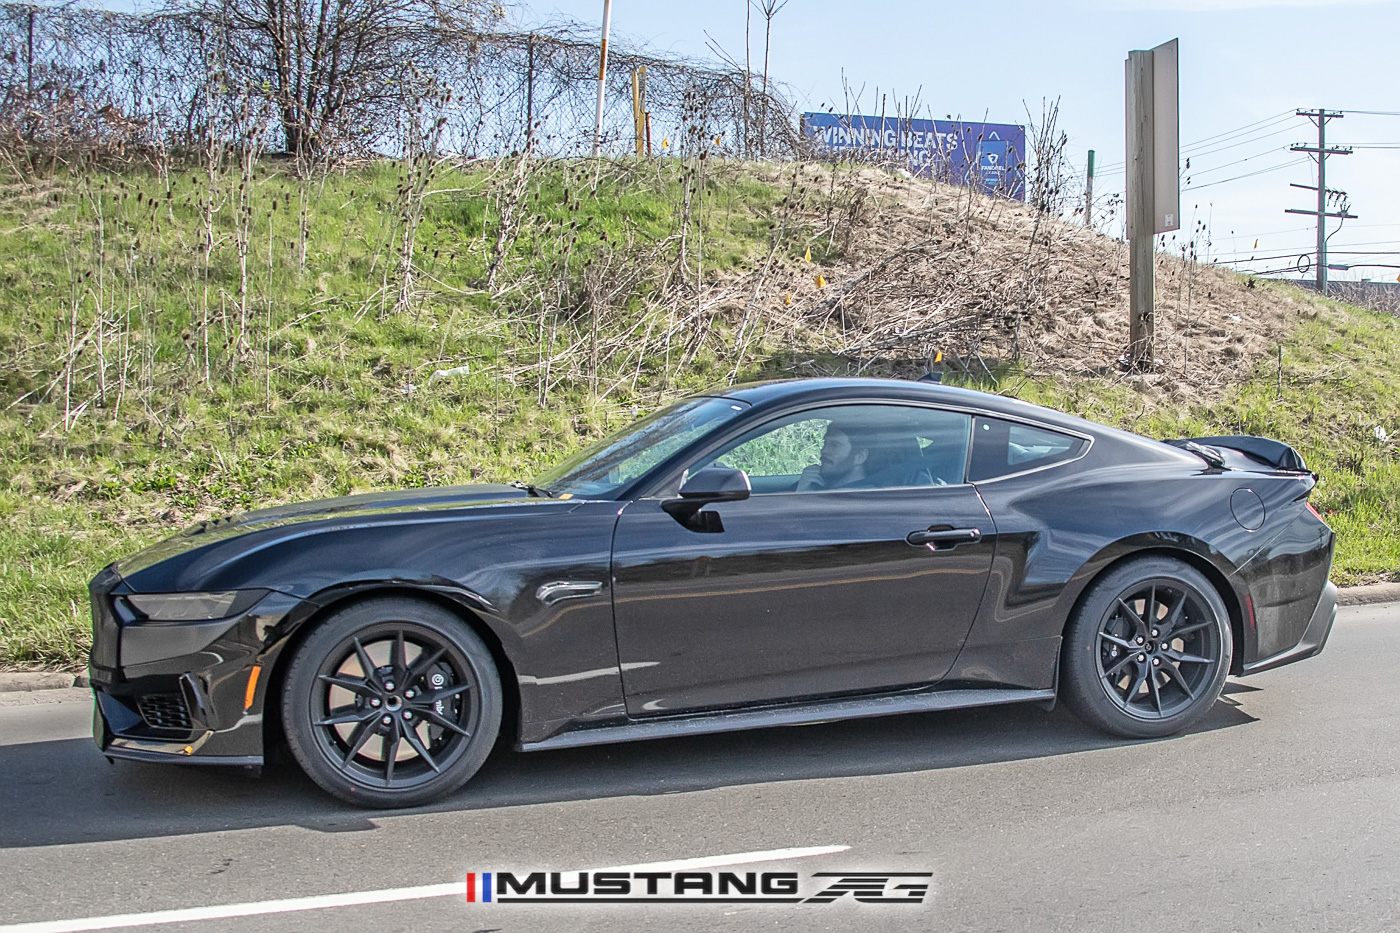 S650 Mustang 📸 Mustang GT3 Road-Version Prototype Spied Testing with Center-Exit Exhaust s650-mustang-variant-prototype-center-exit-exhaust-3